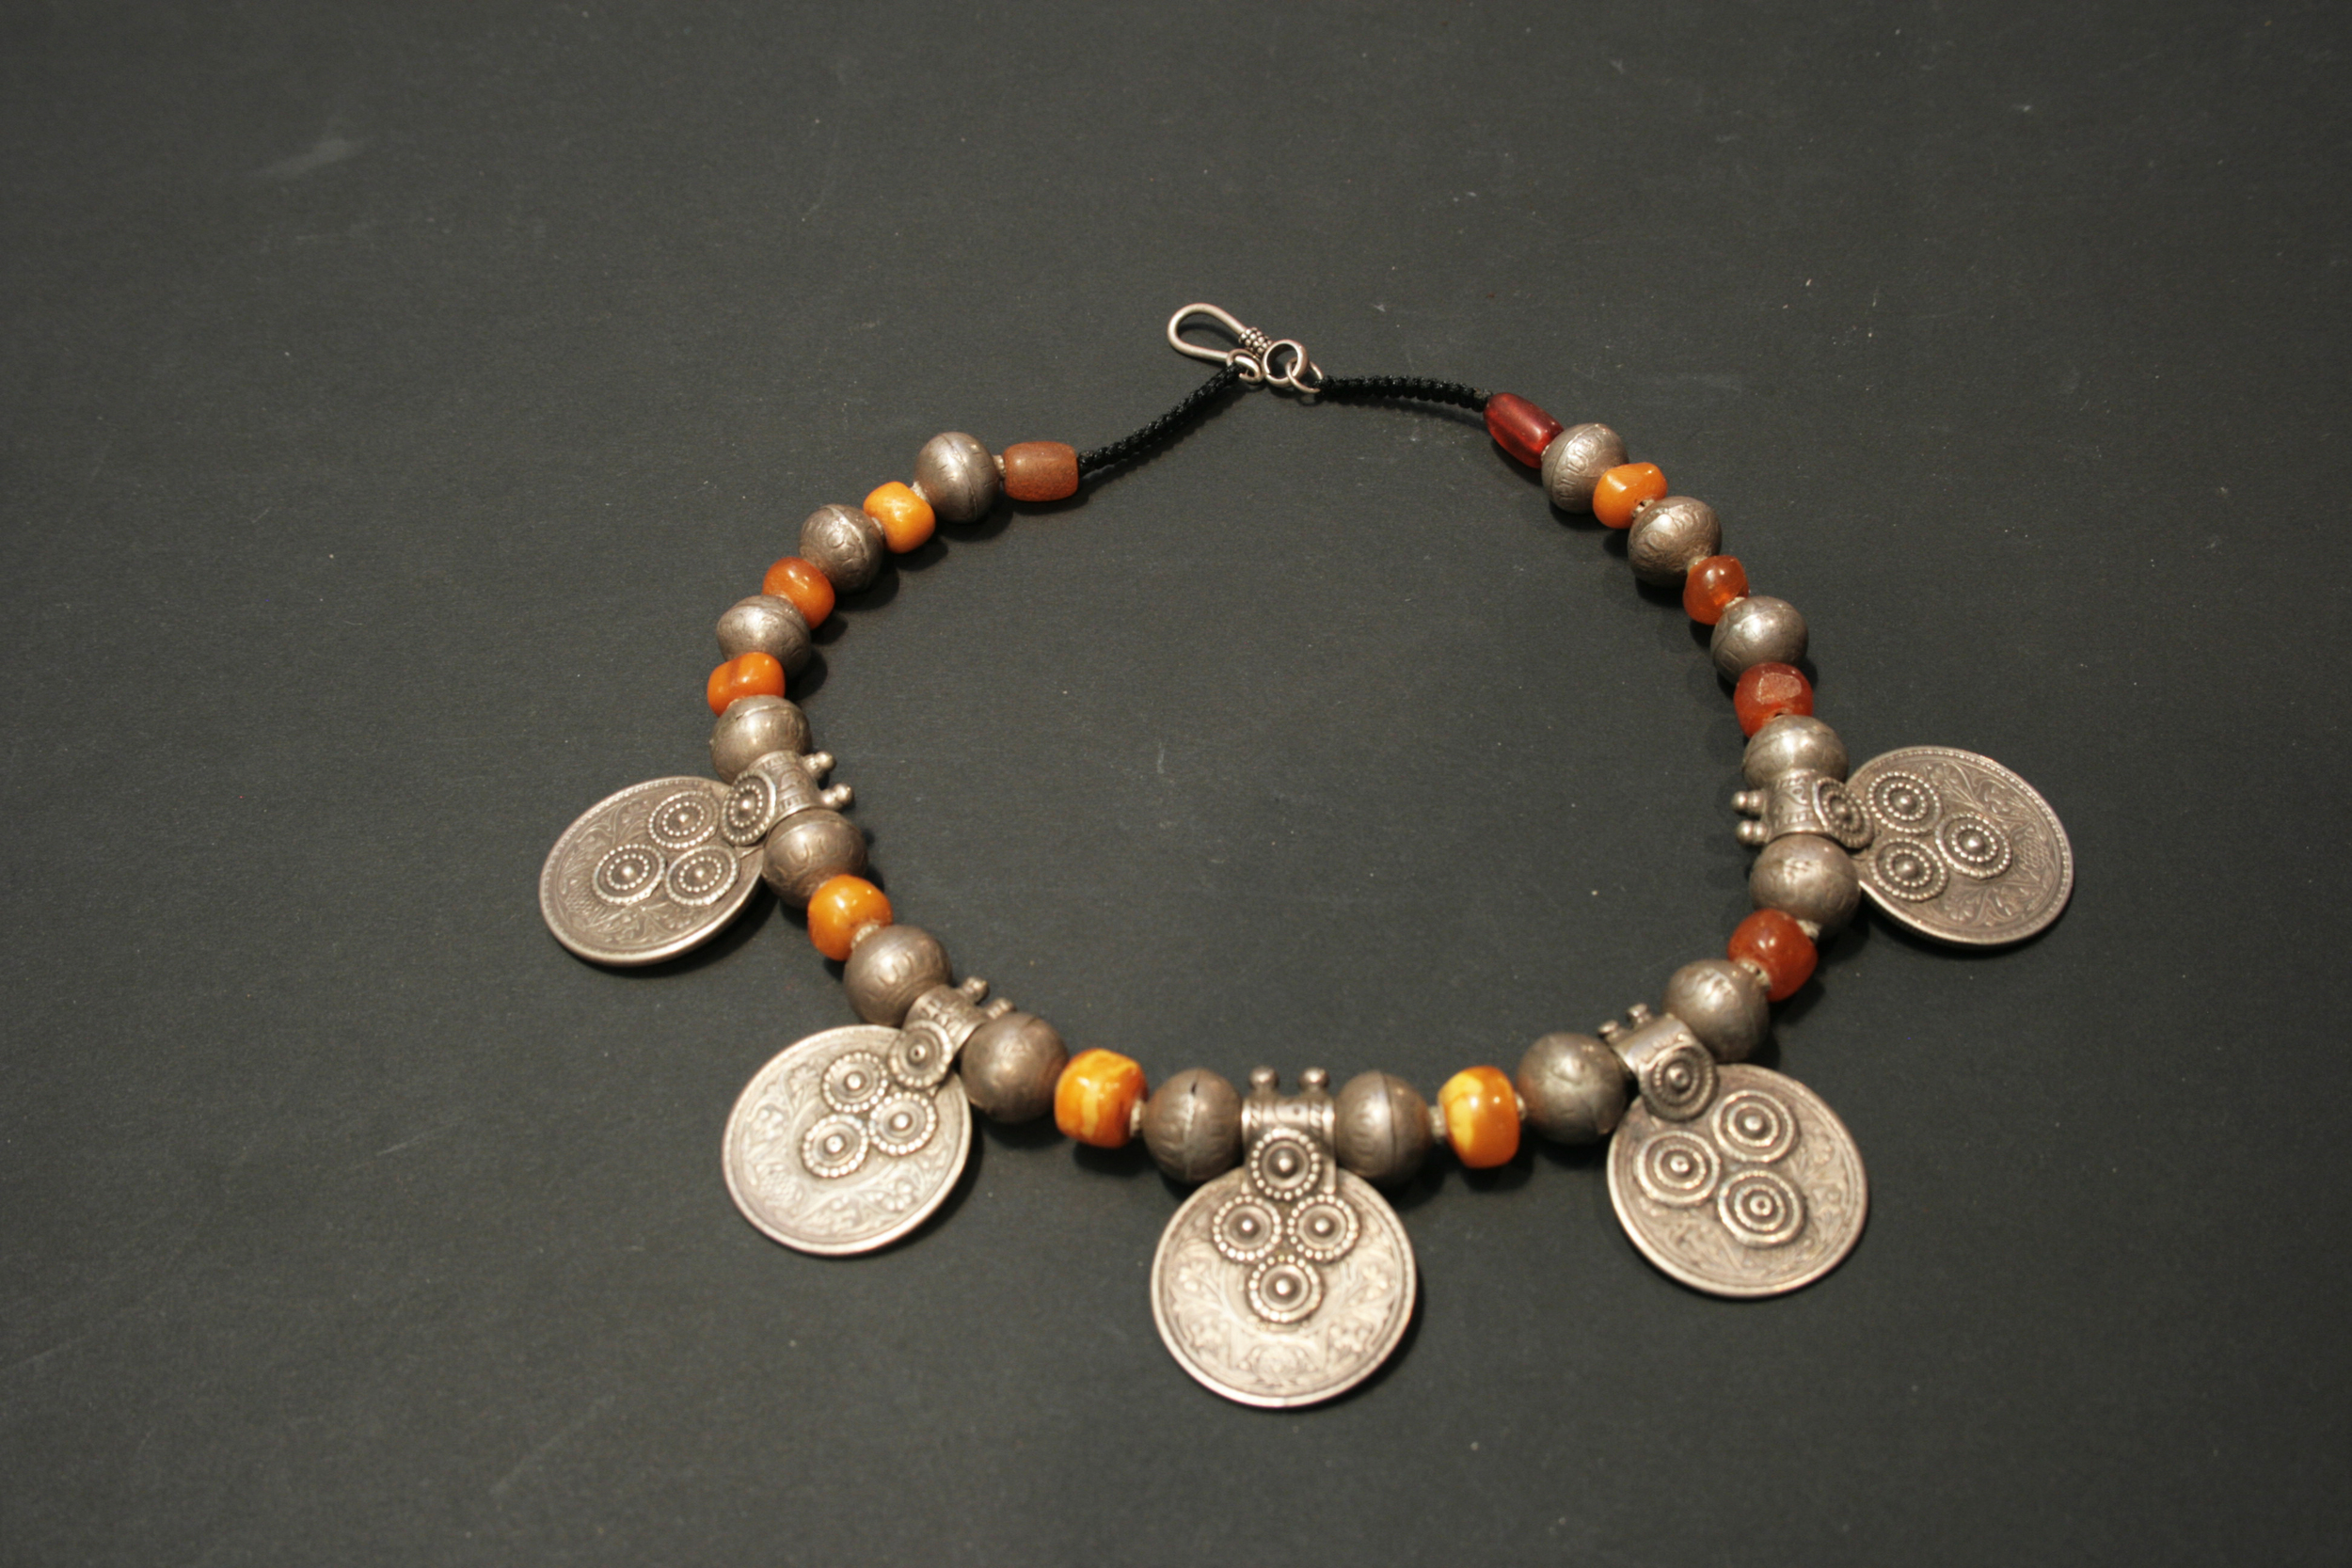 Tribal Tent designed coin necklace